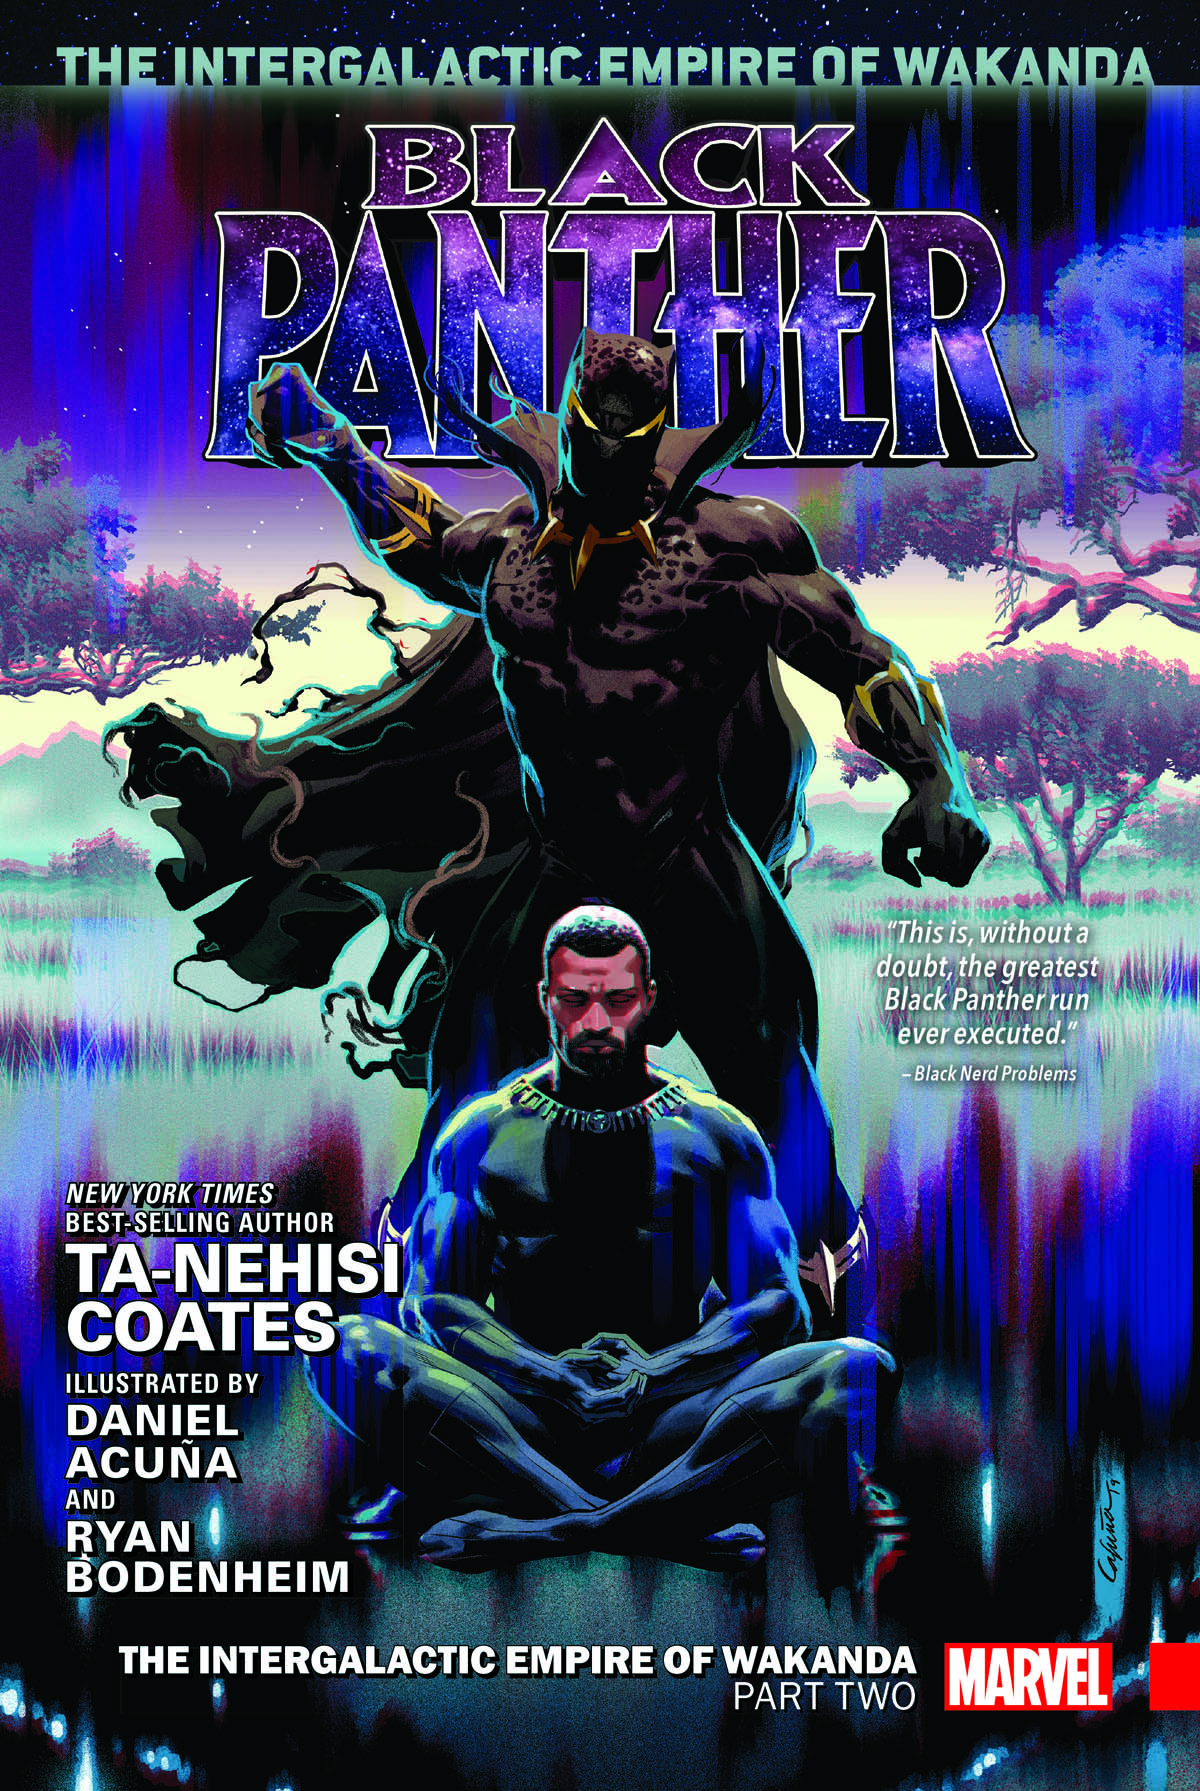 Black Panther Vol. 4: The Intergalactic Empire Of Wakanda Part Two (Hardcover)